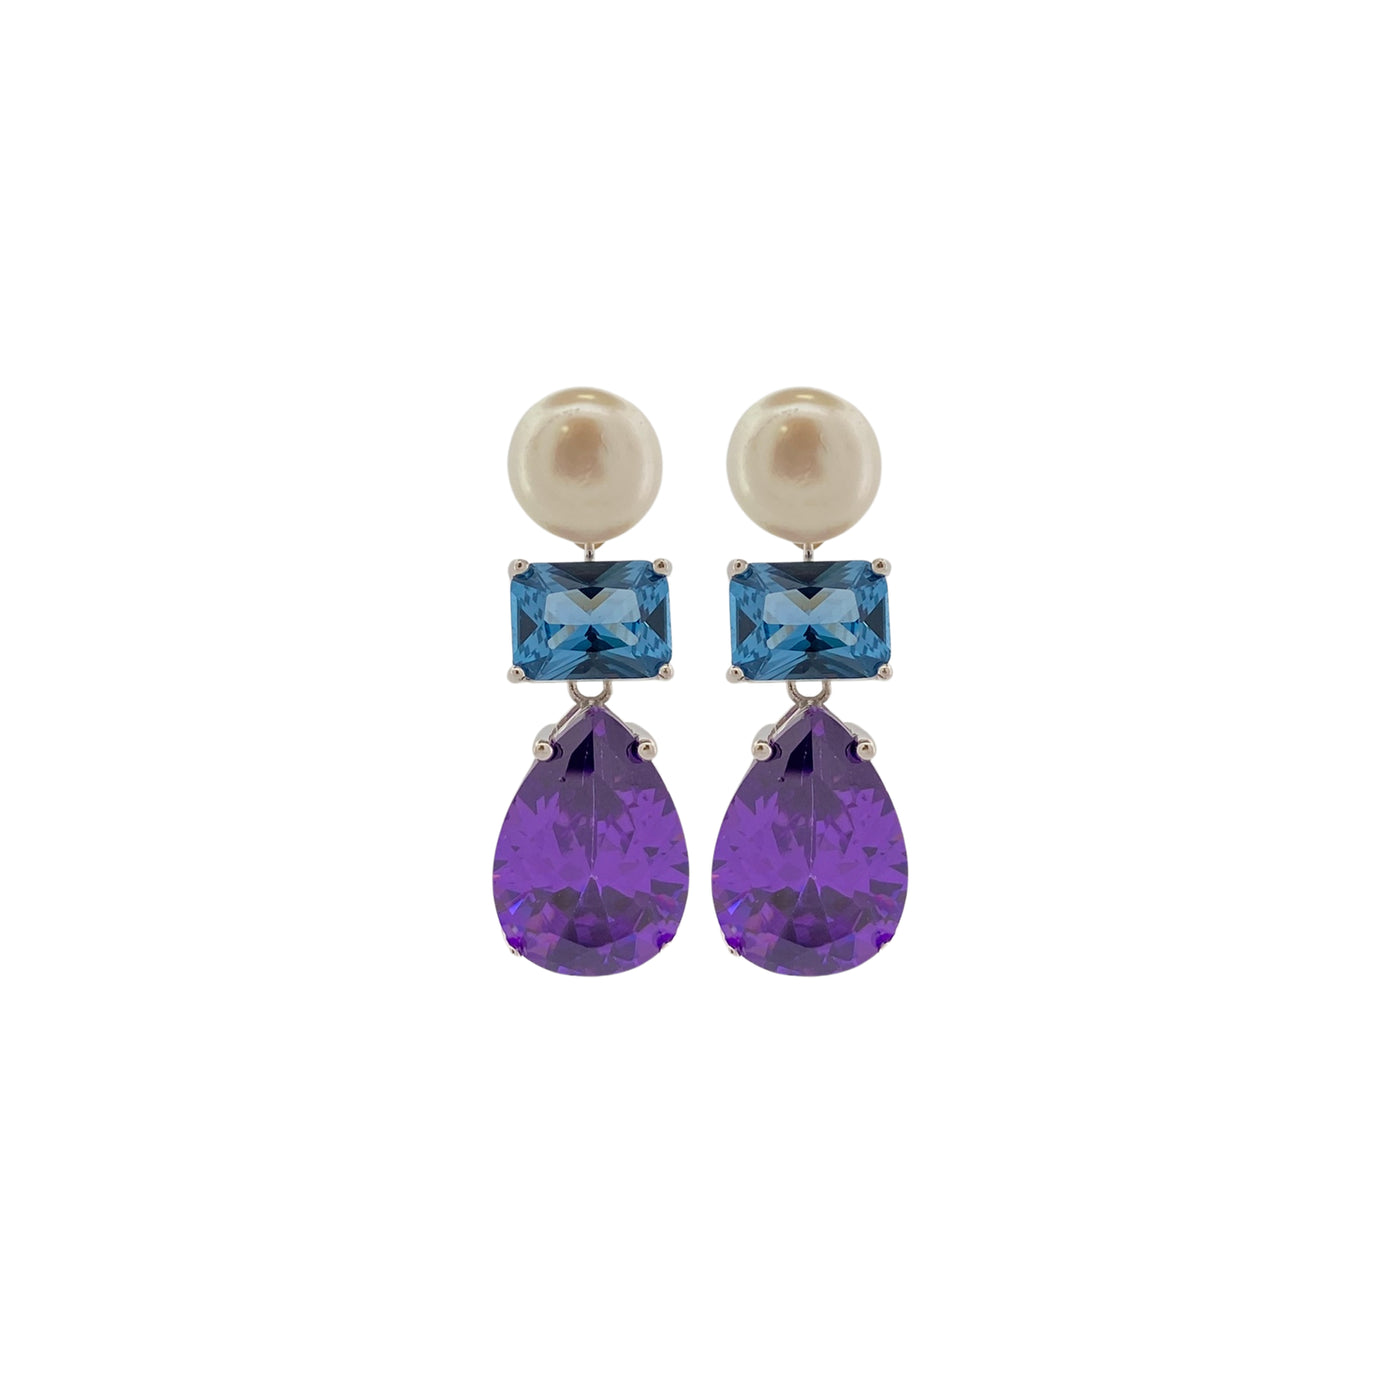 EARRINGS WITH STONES AND PEARL